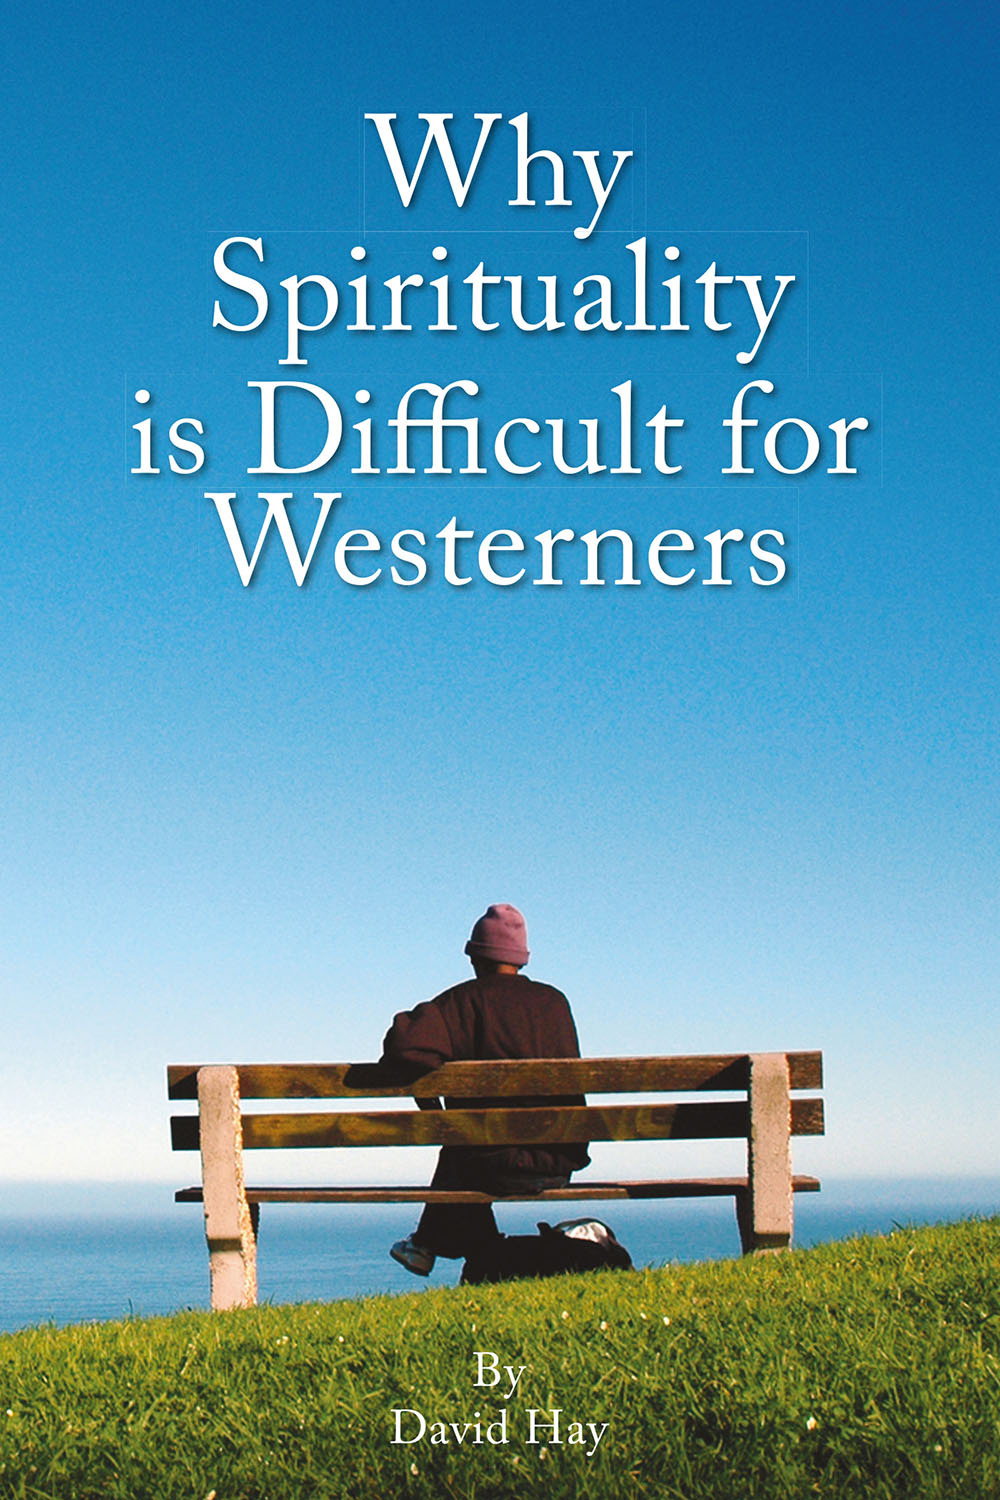 Hay, David - Why Spirituality is Difficult for Westeners, ebook